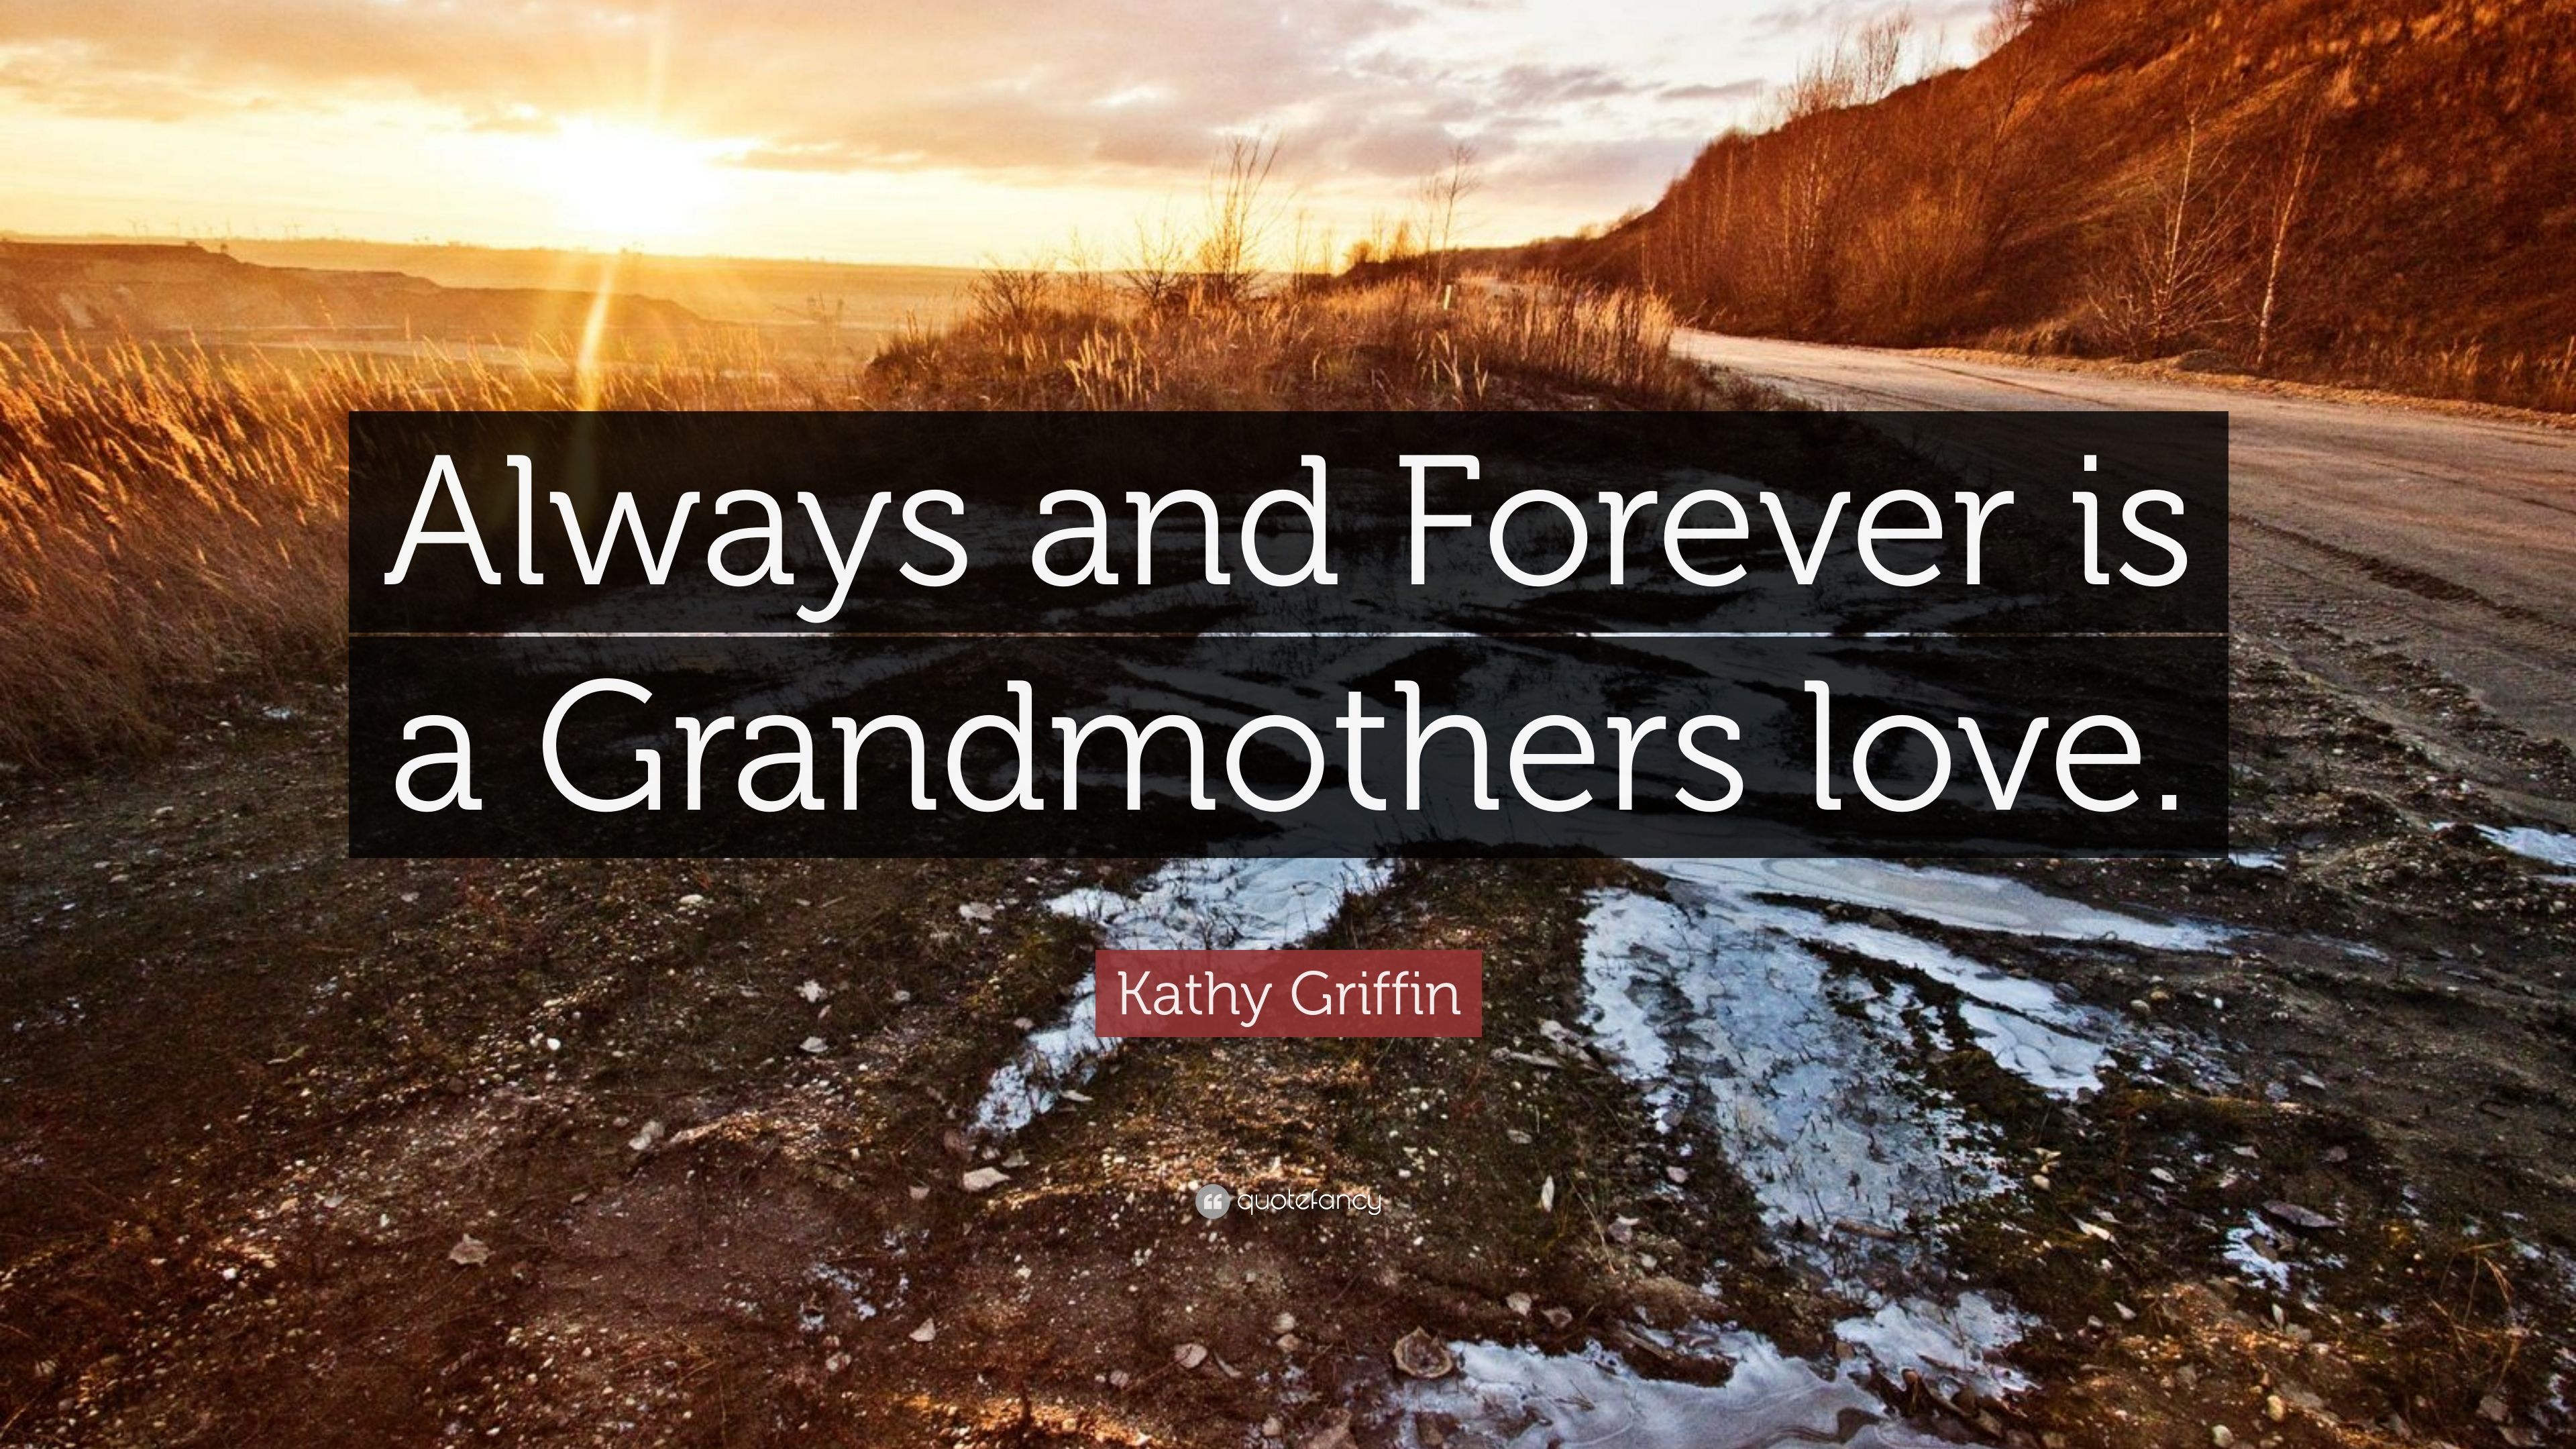 Kathy Griffin Quote: “Always and Forever is a Grandmothers love.” (7 wallpaper)